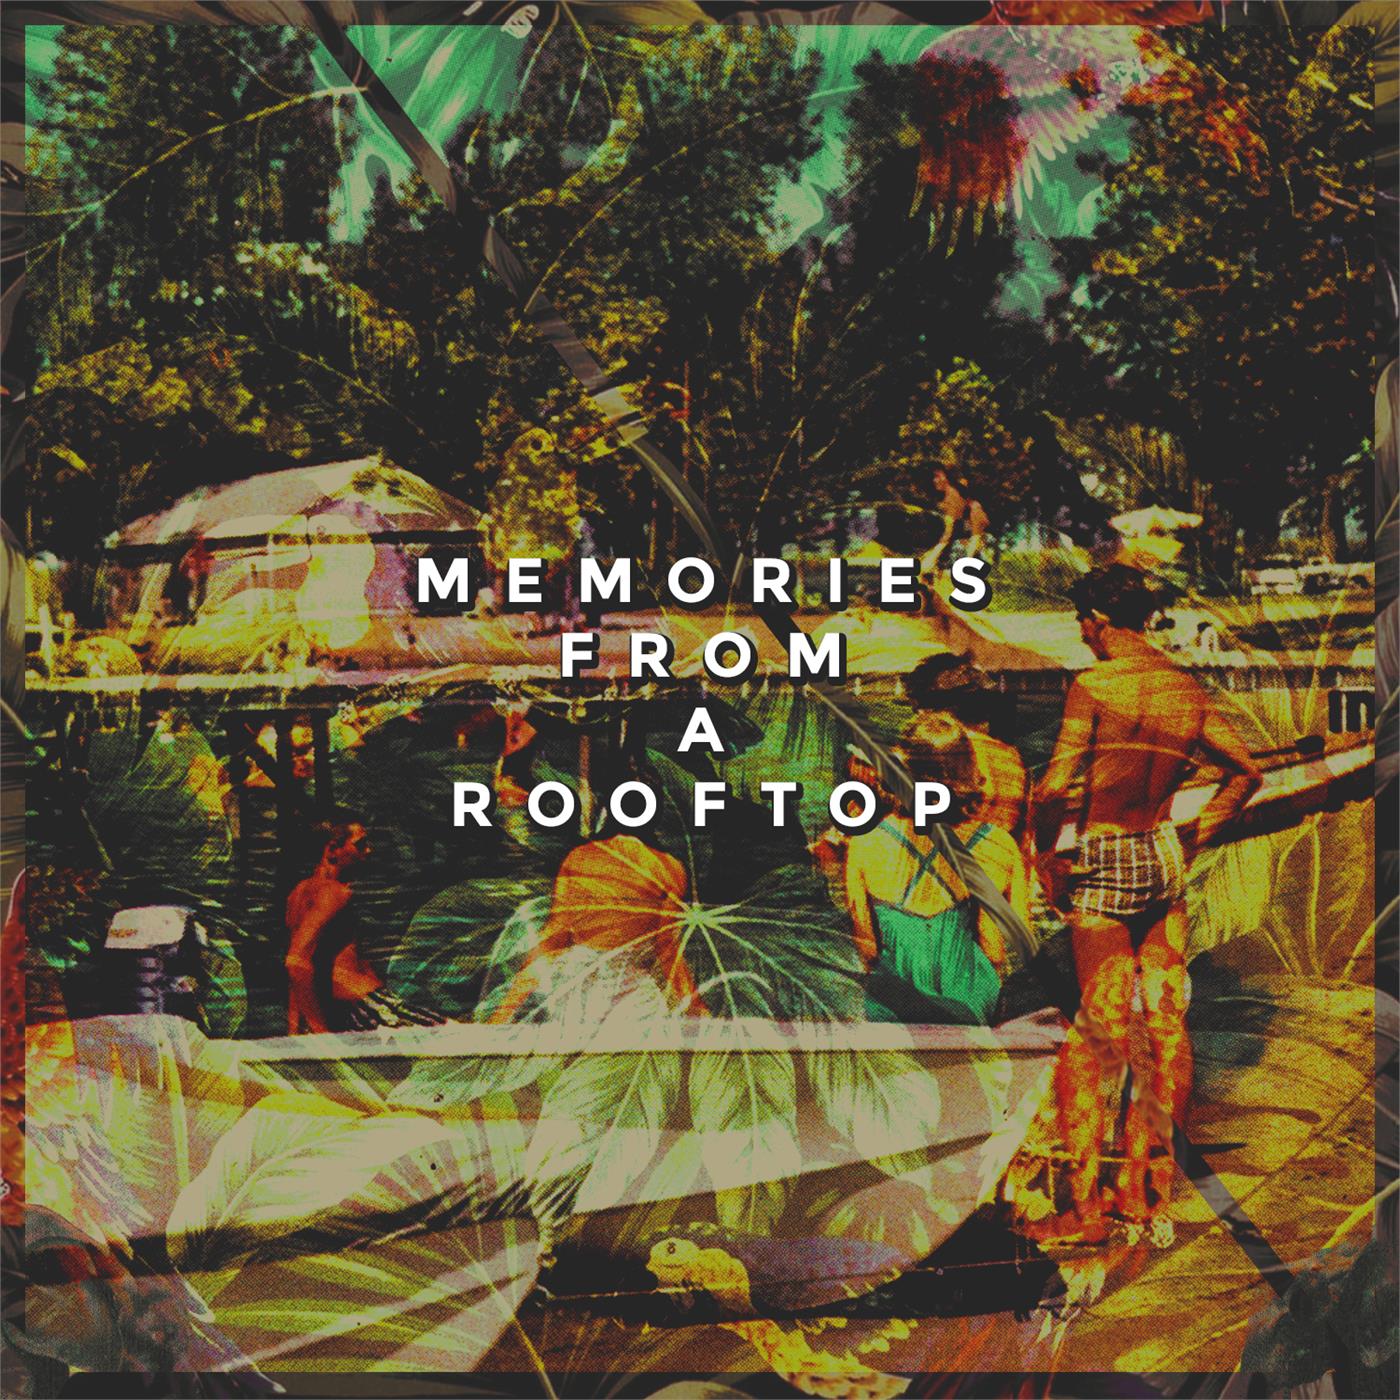 Memories From a Rooftop